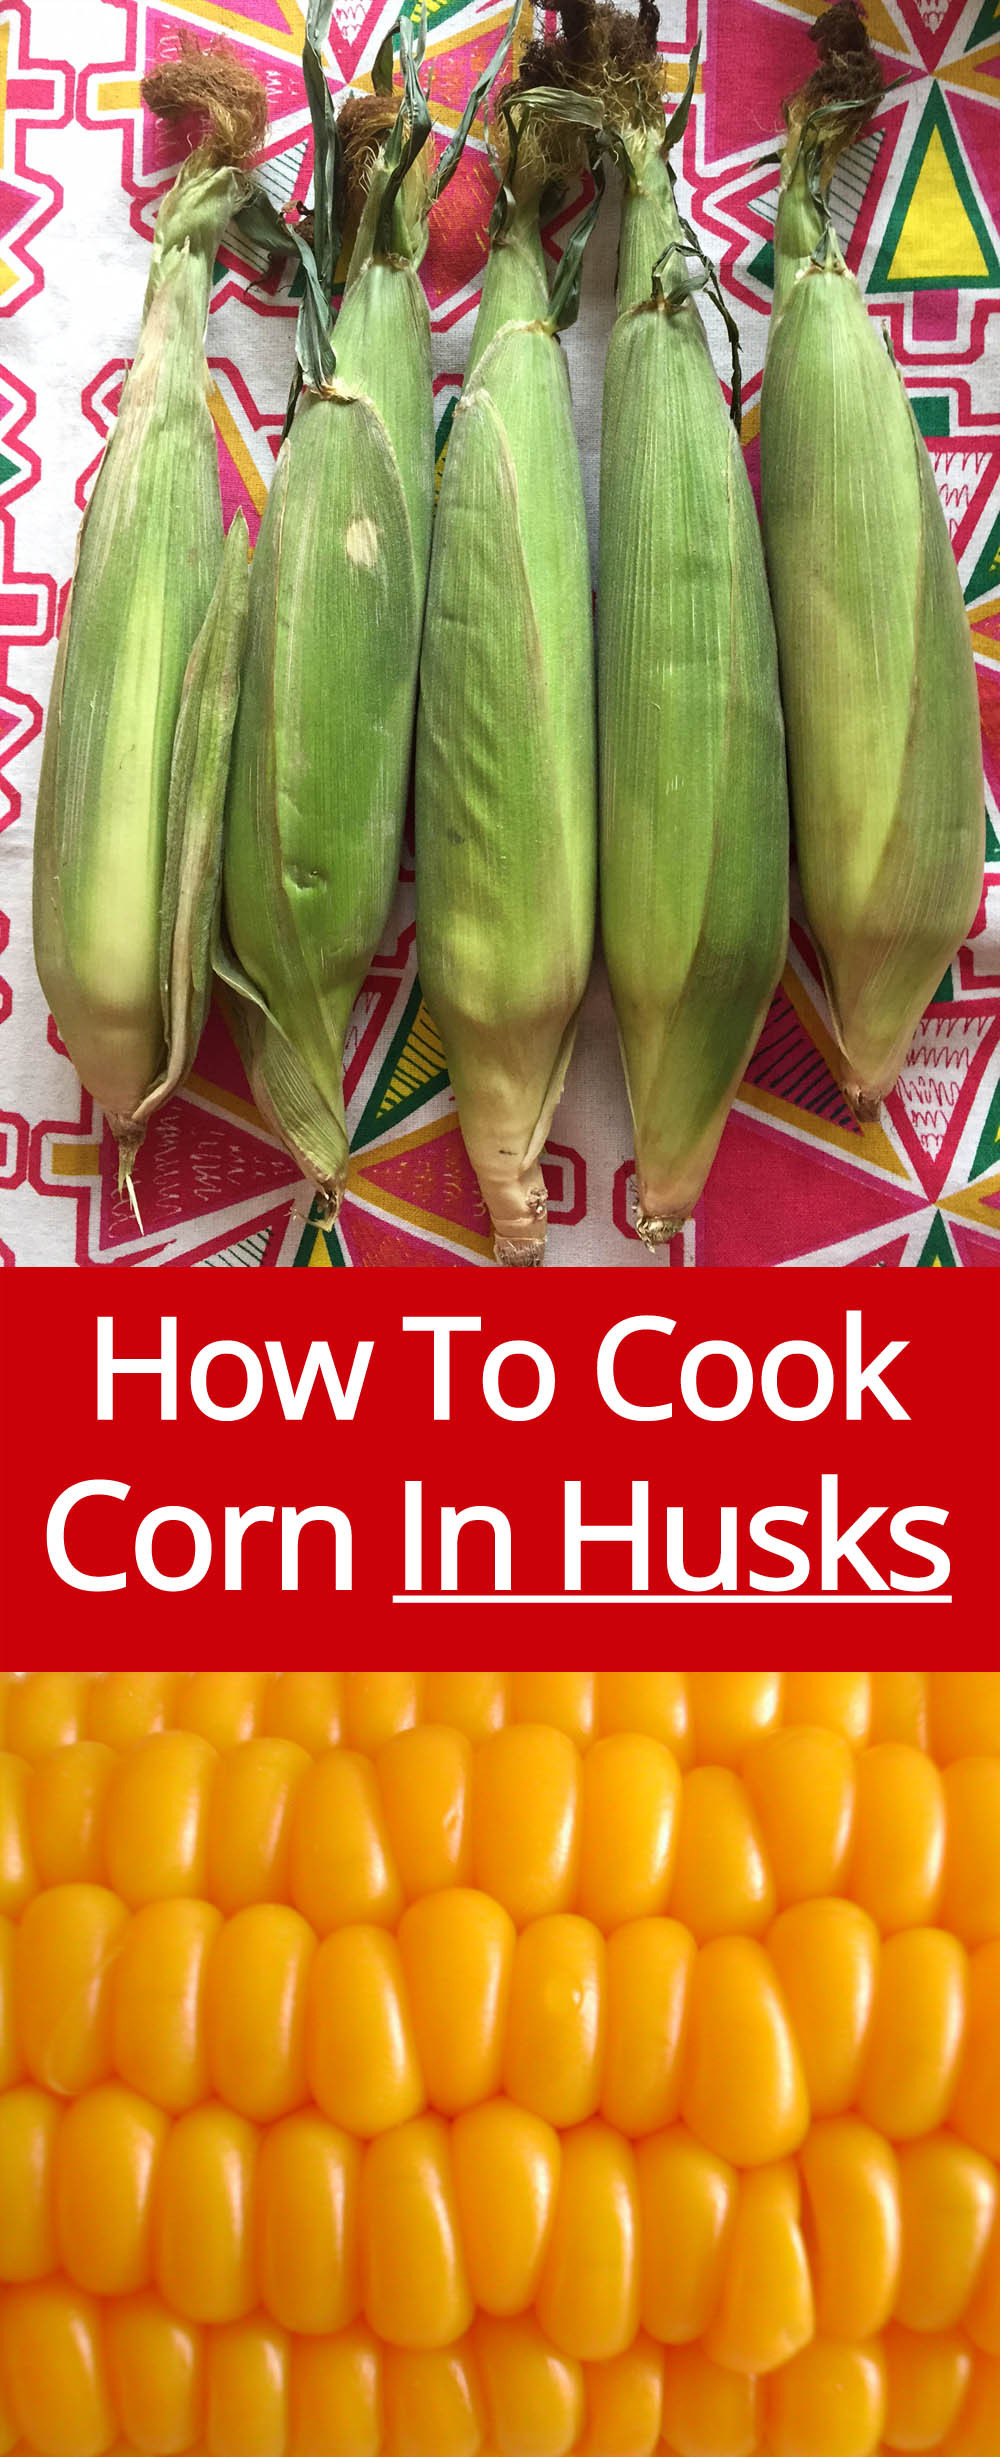 Microwave Corn On The Cob With Husk
 How To Cook Corn In The Husk Microwave Grill Bake Boil